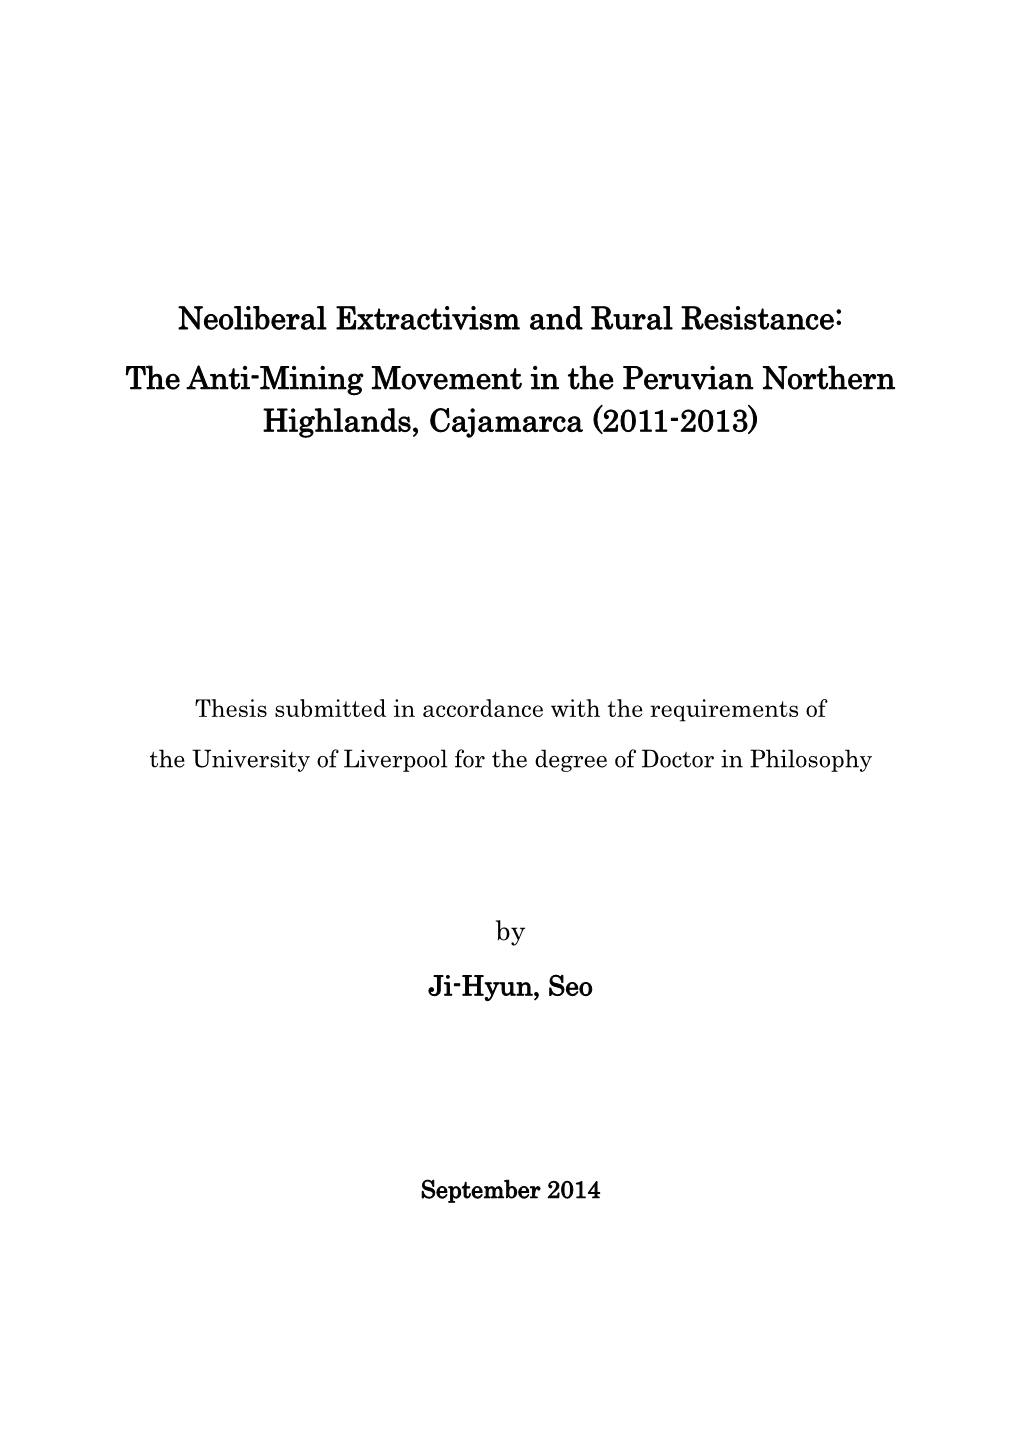 Neoliberal Extractivism and Rural Resistance: the Anti-Mining Movement in the Peruvian Northern Highlands, Cajamarca (2011-2013)